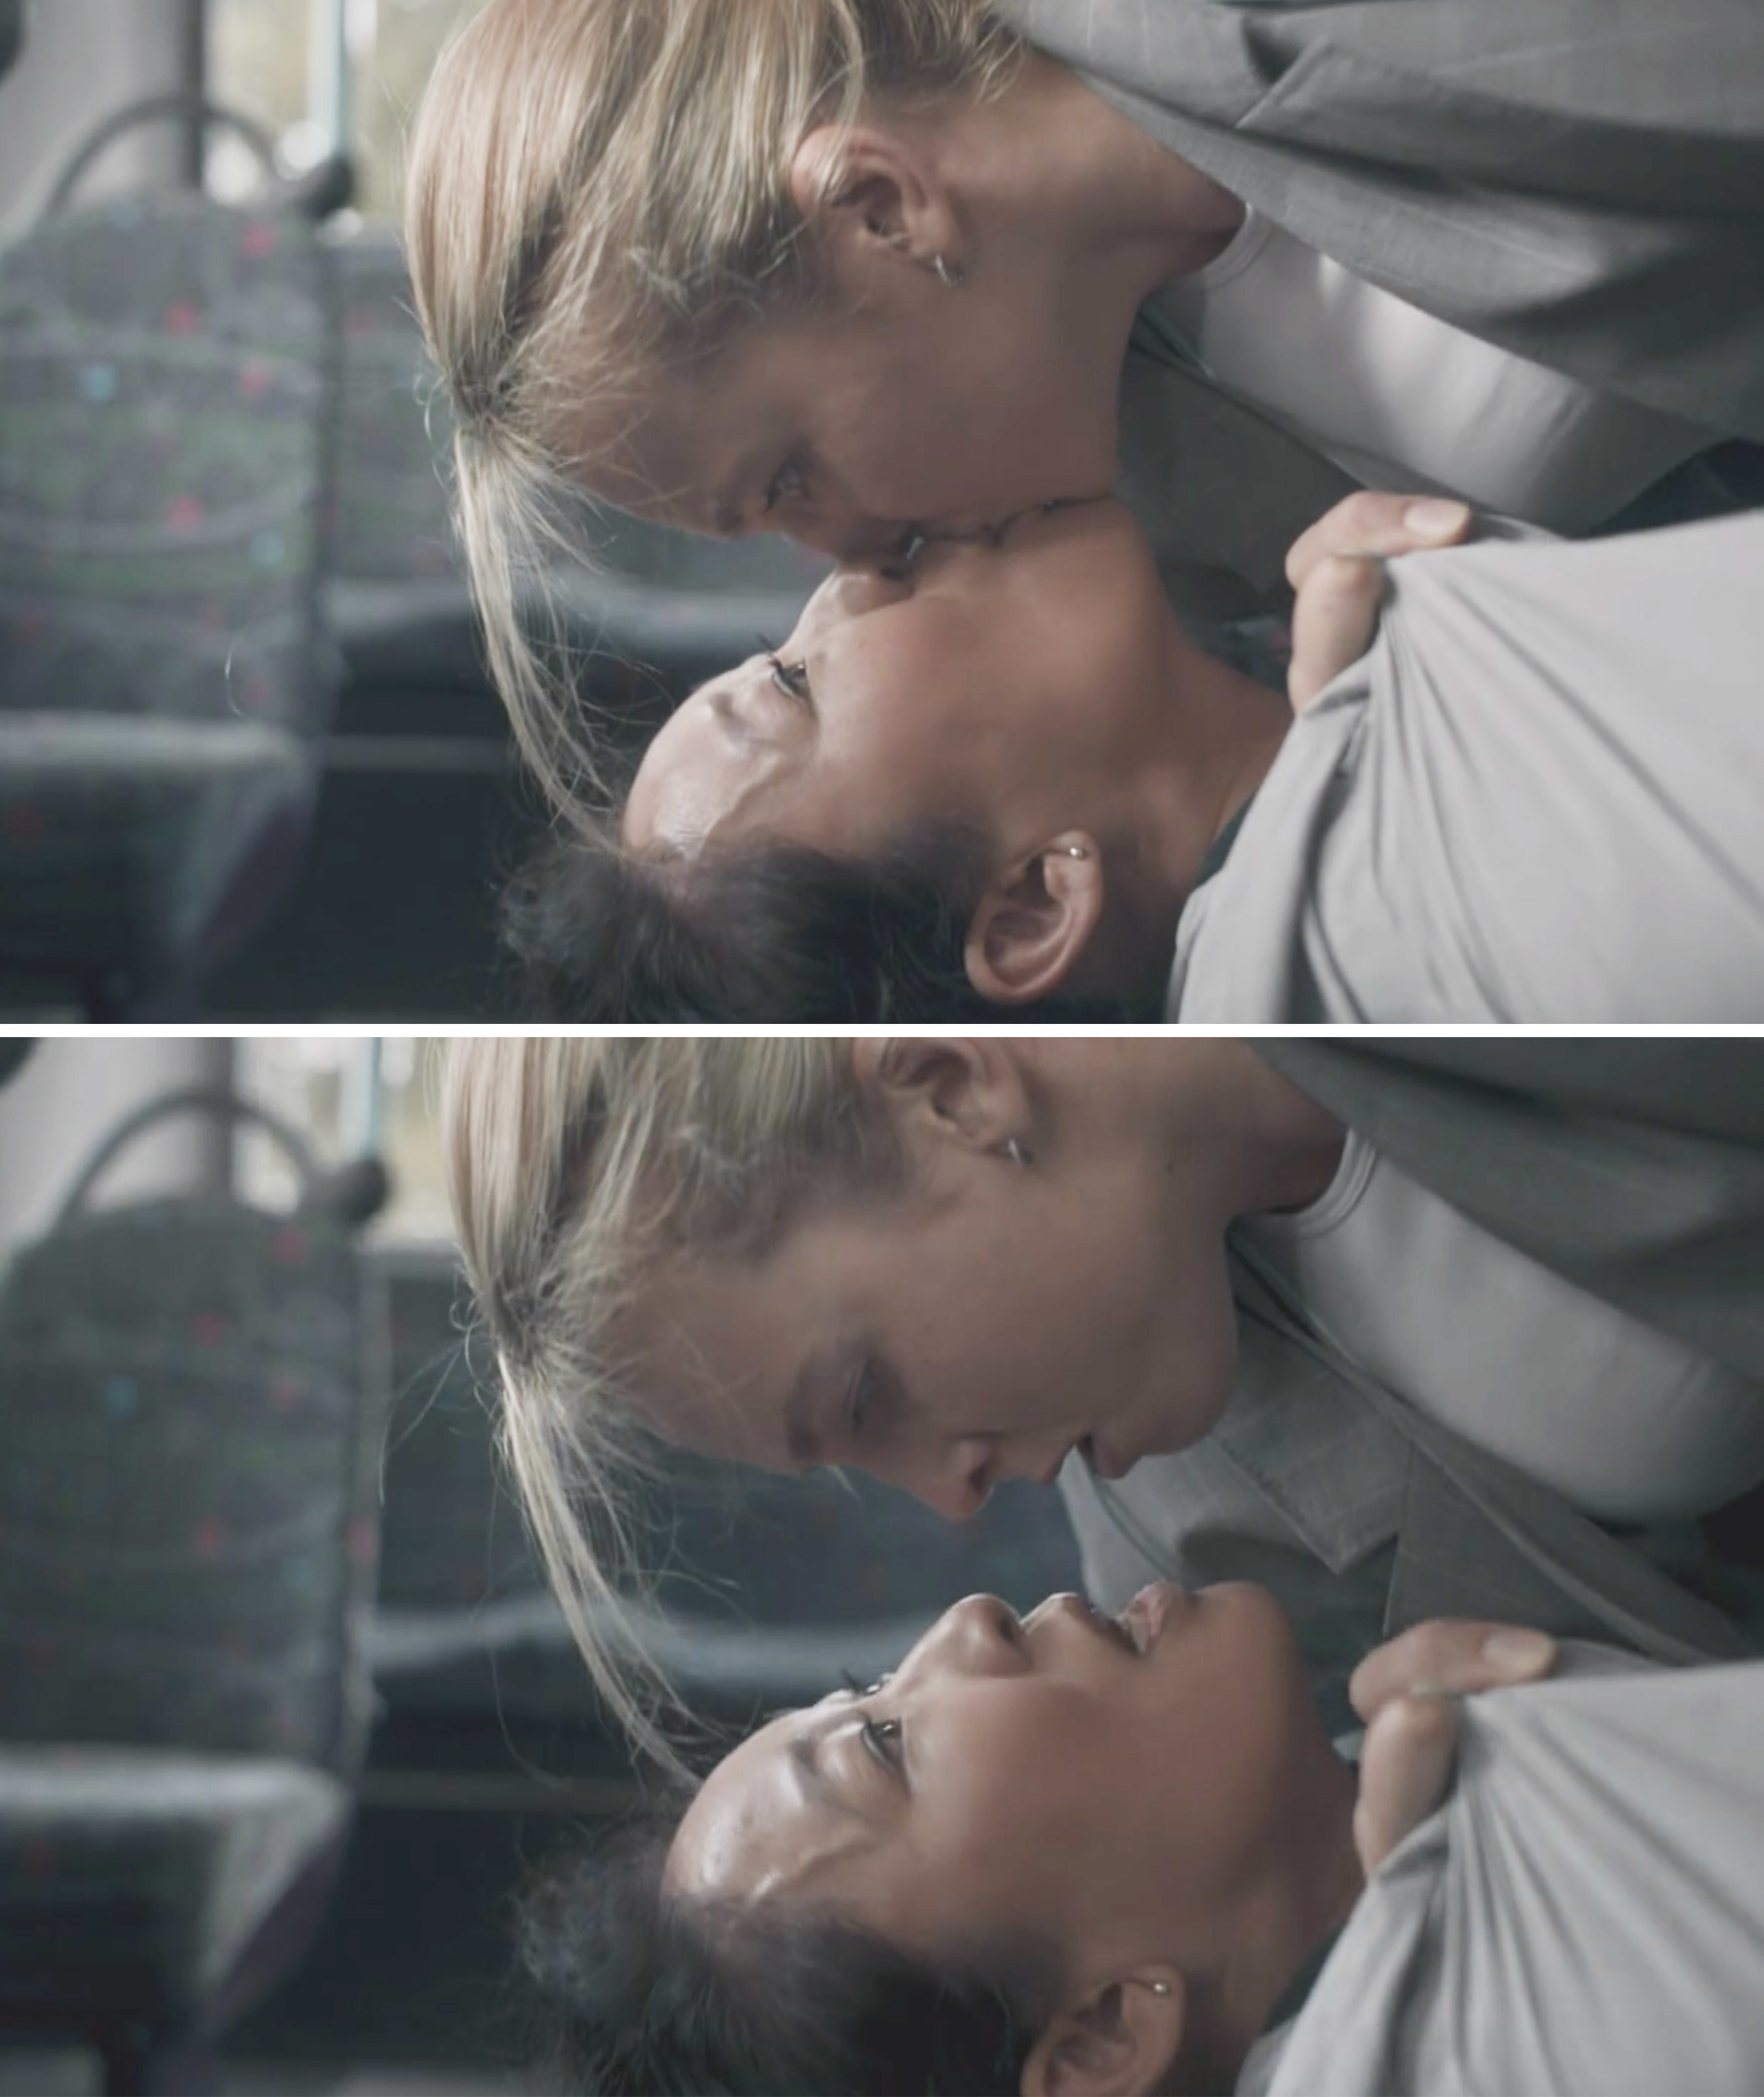 Villanelle and Eve kissing on a bus